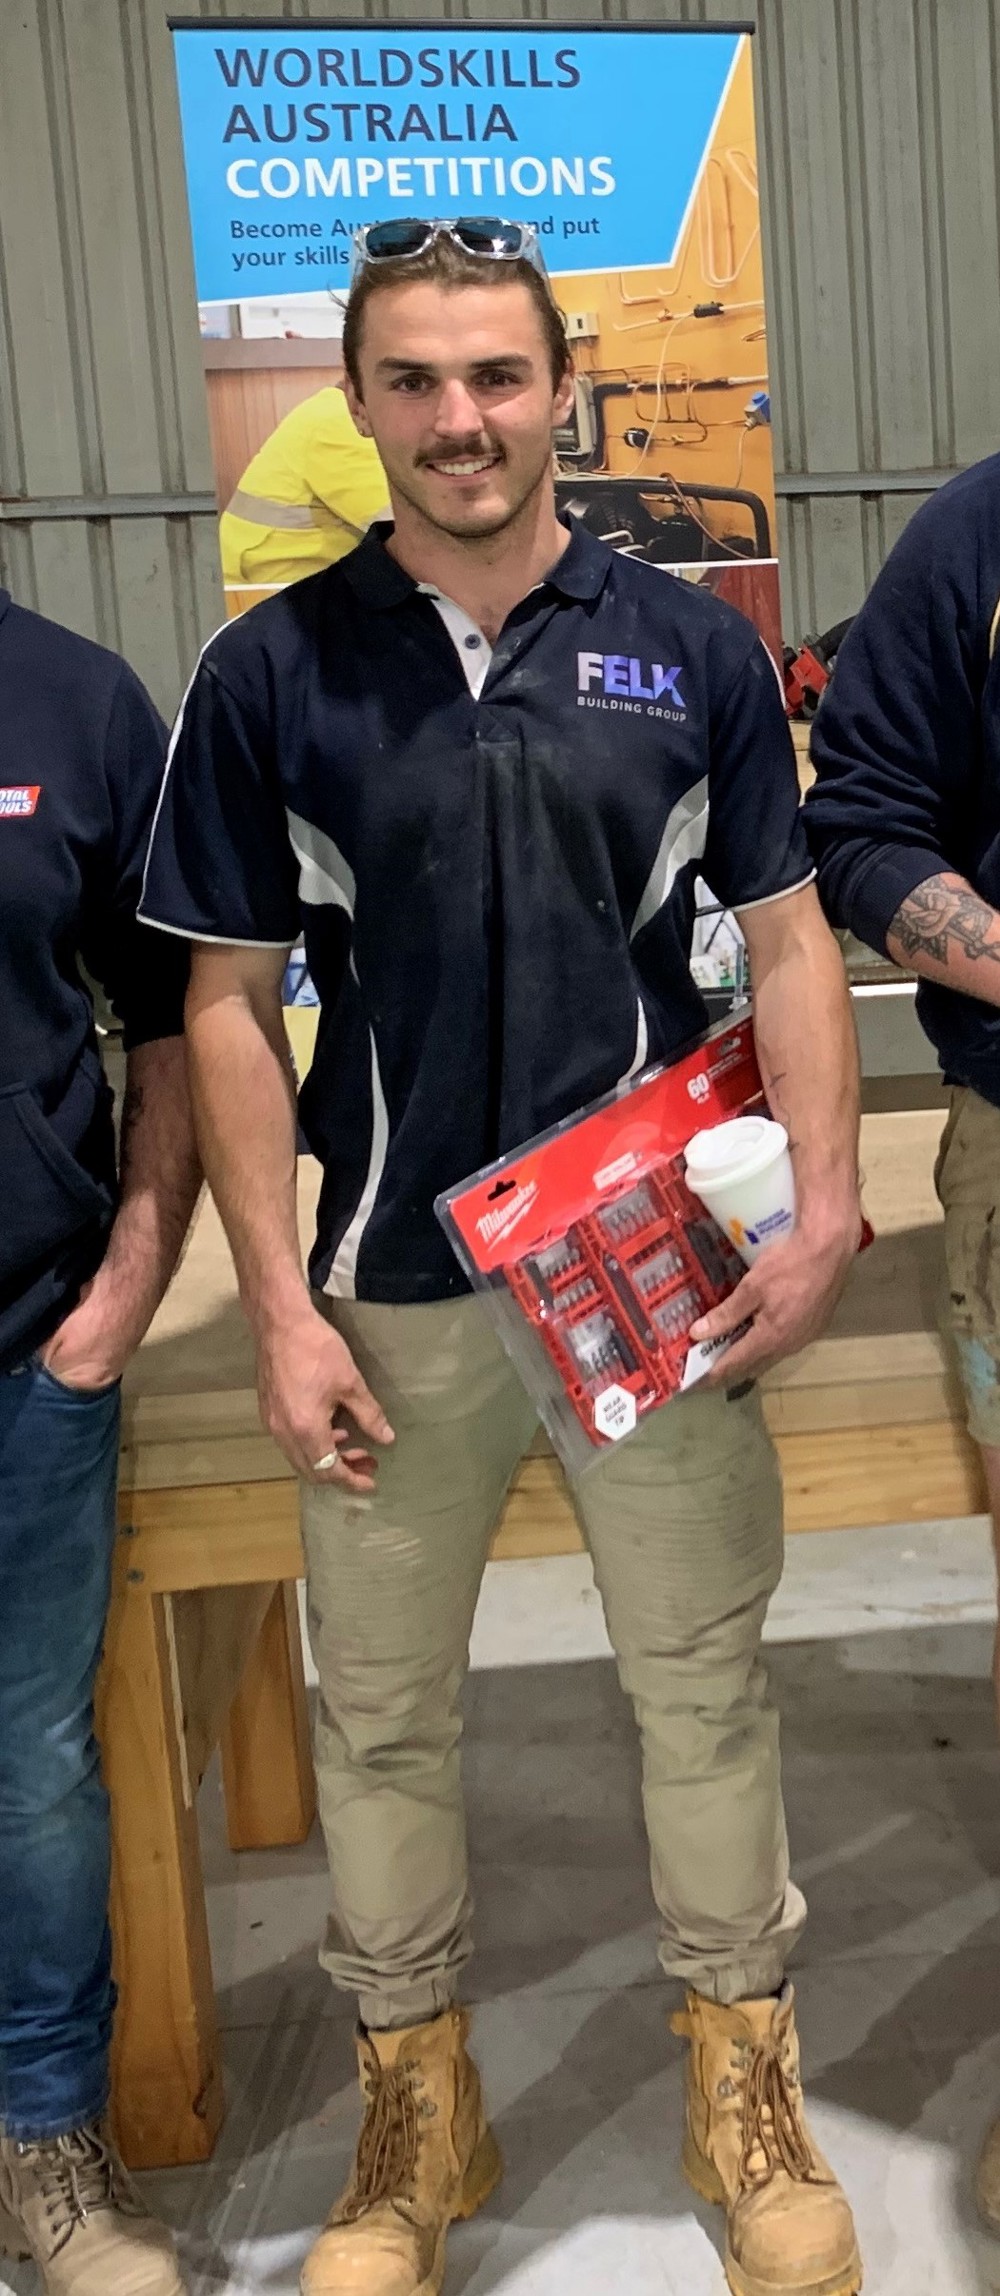 Jayme Cannon - SWTAFE carpentry student has been recognised as the best apprentice carpenter in Australia at the WorldSkills National Championships.